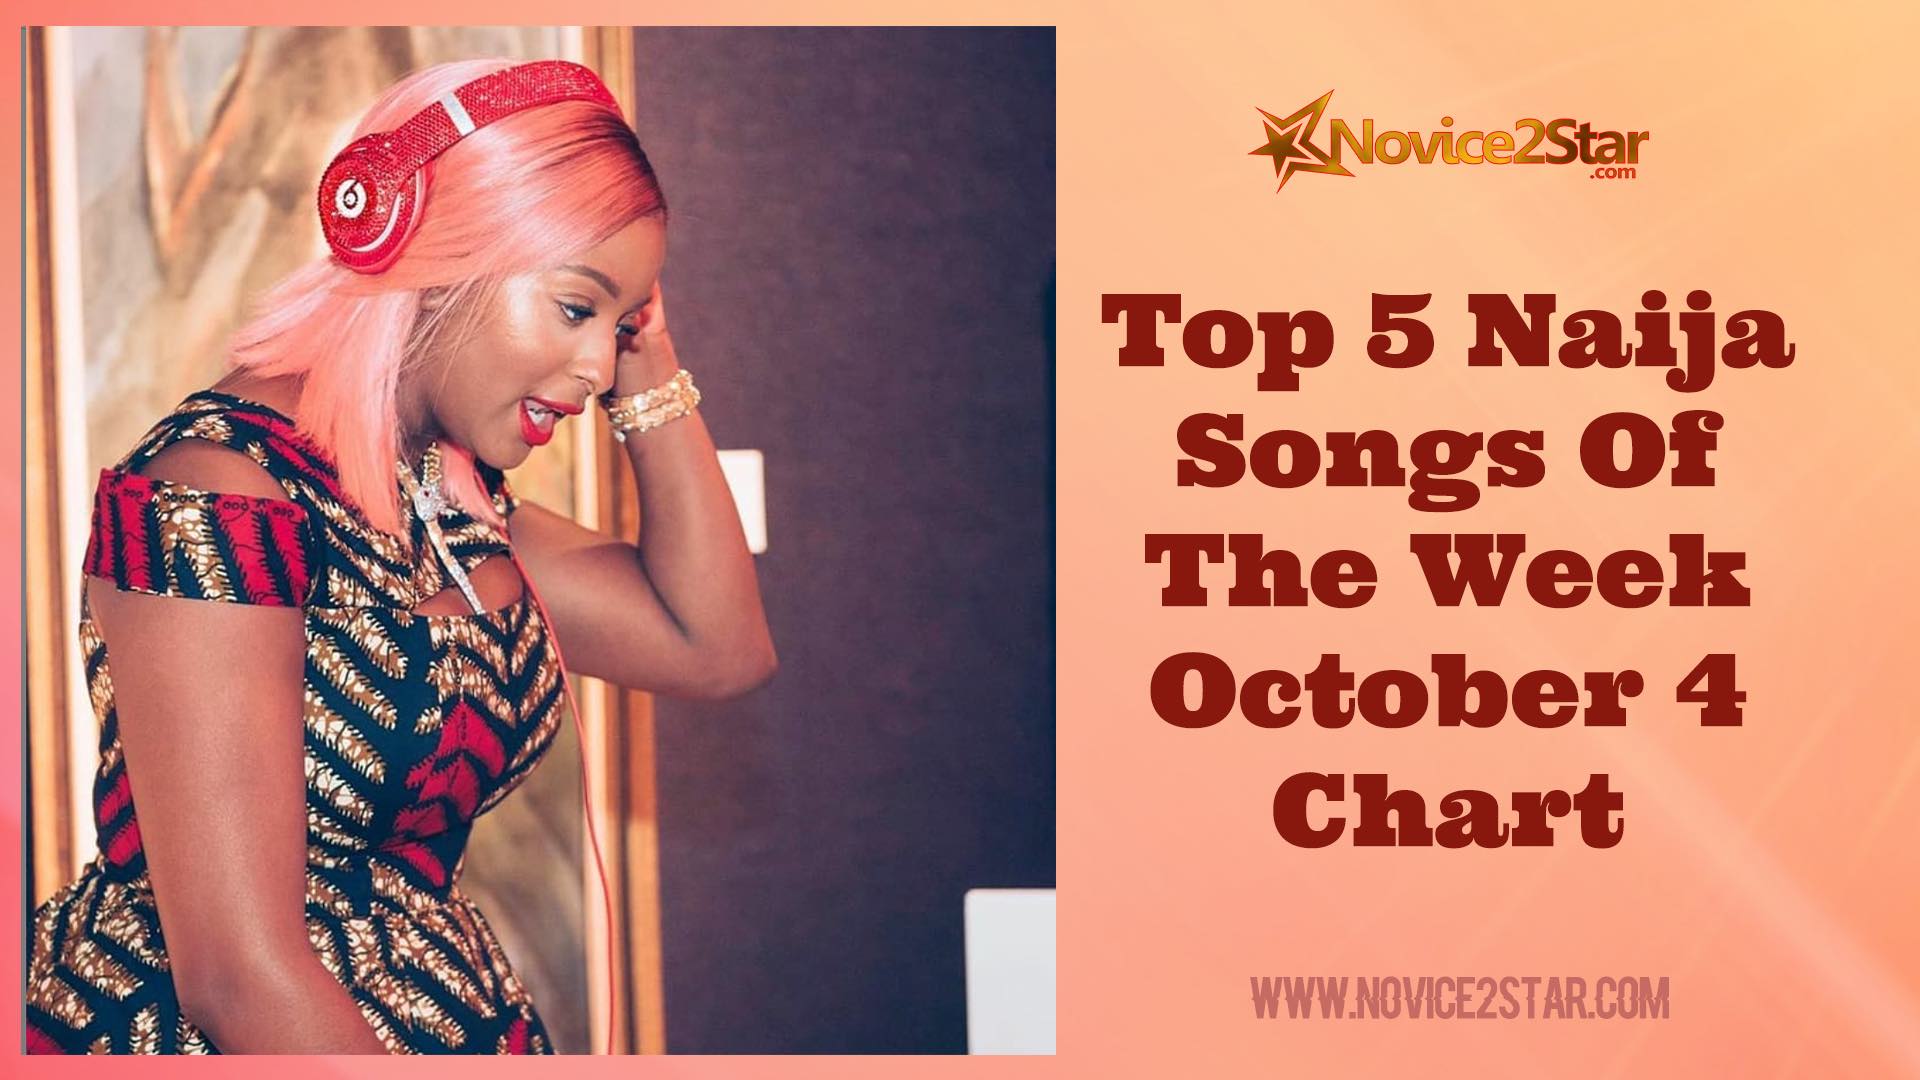 Top 5 Nigerian Songs Of The Week – October 4th 2019 Chart